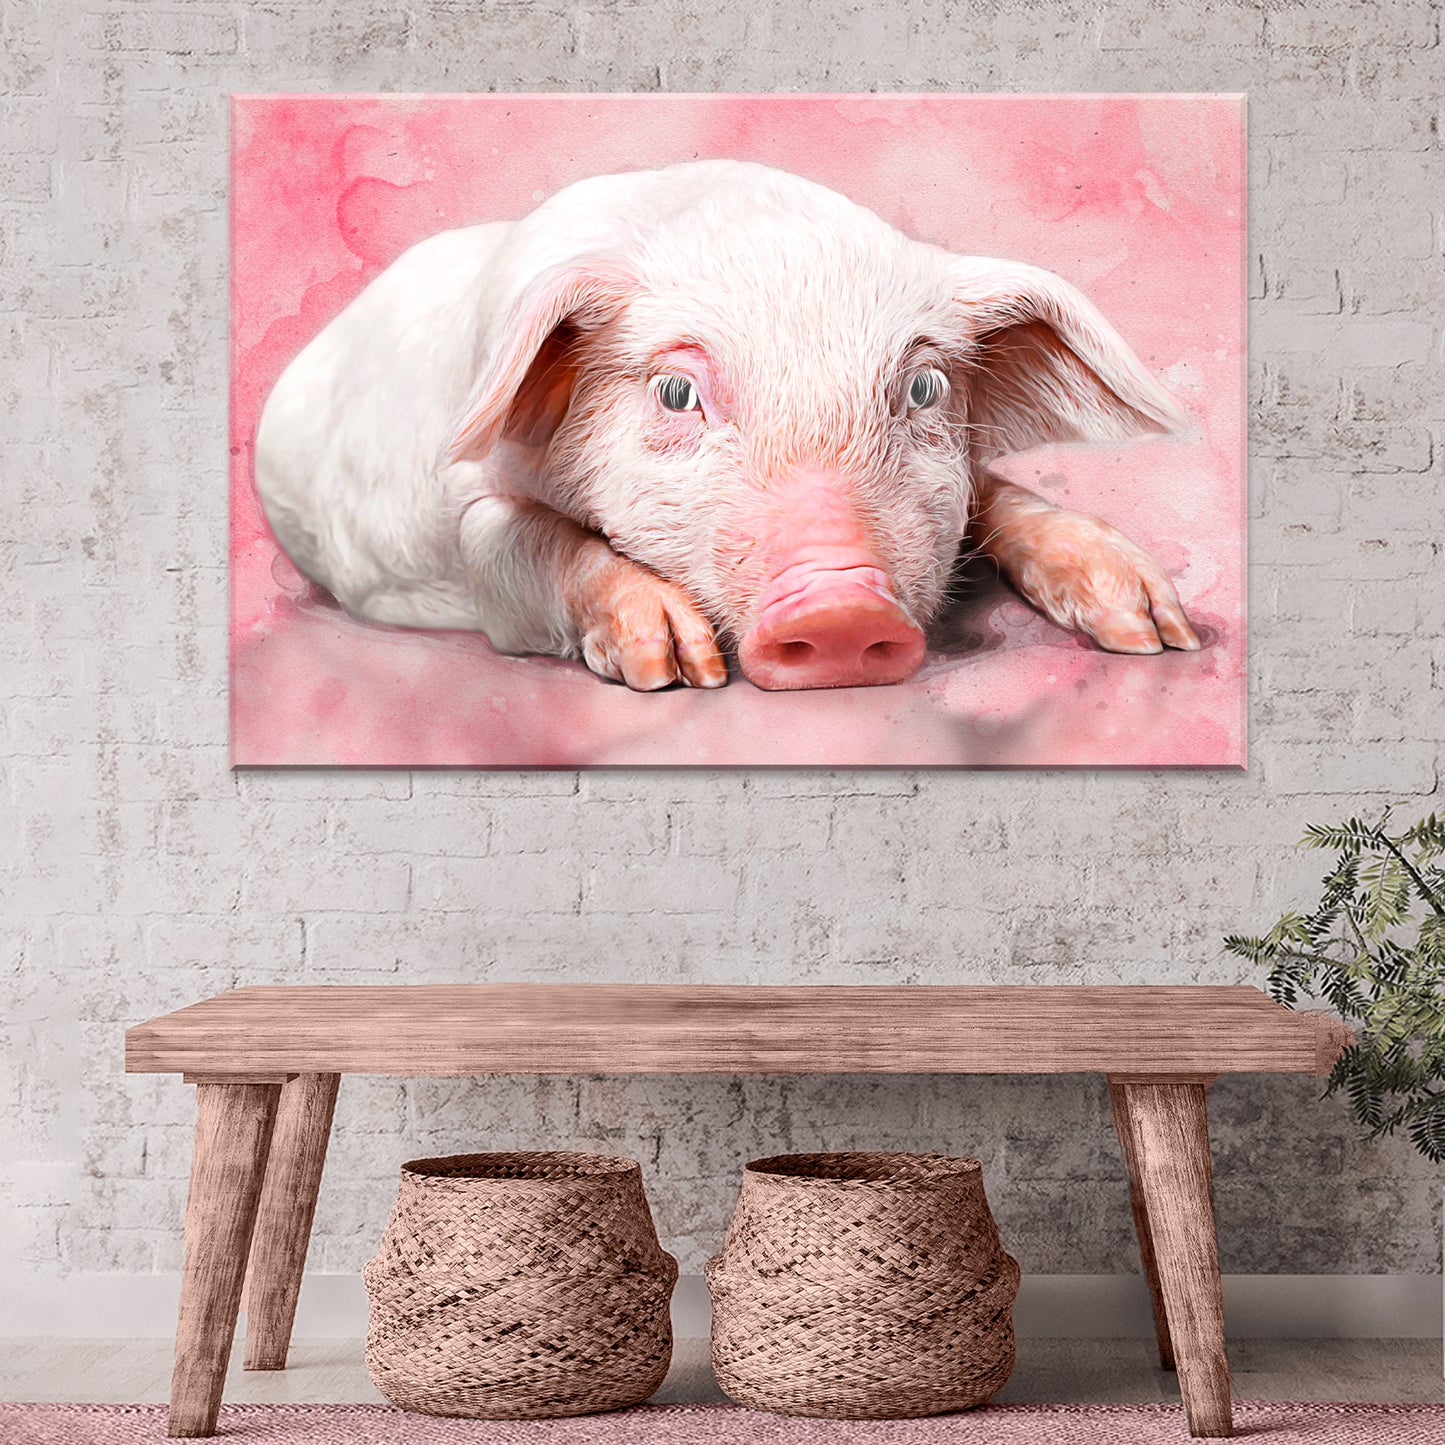 Lazy Pig Portrait Canvas Wall Art Style 2 - Image by Tailored Canvases